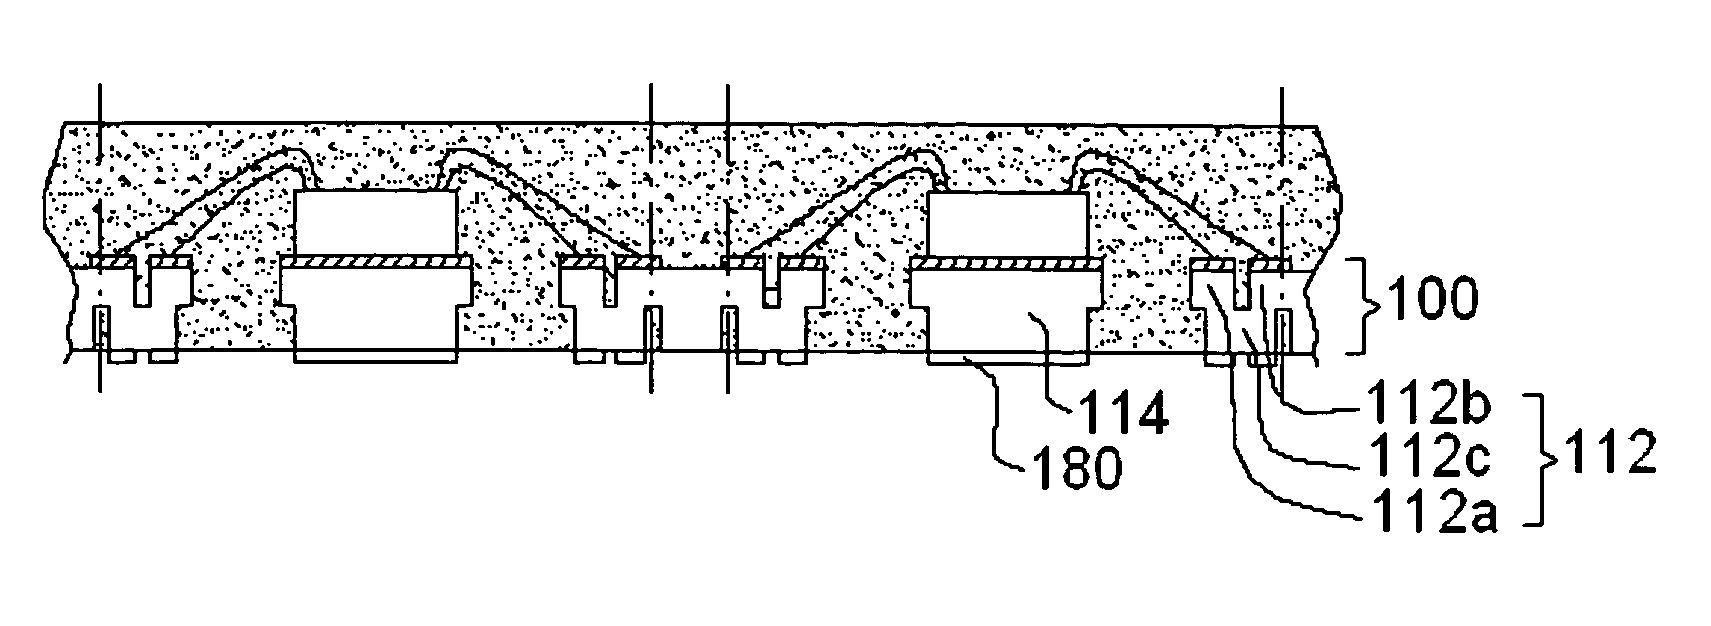 Process and lead frame for making leadless semiconductor packages